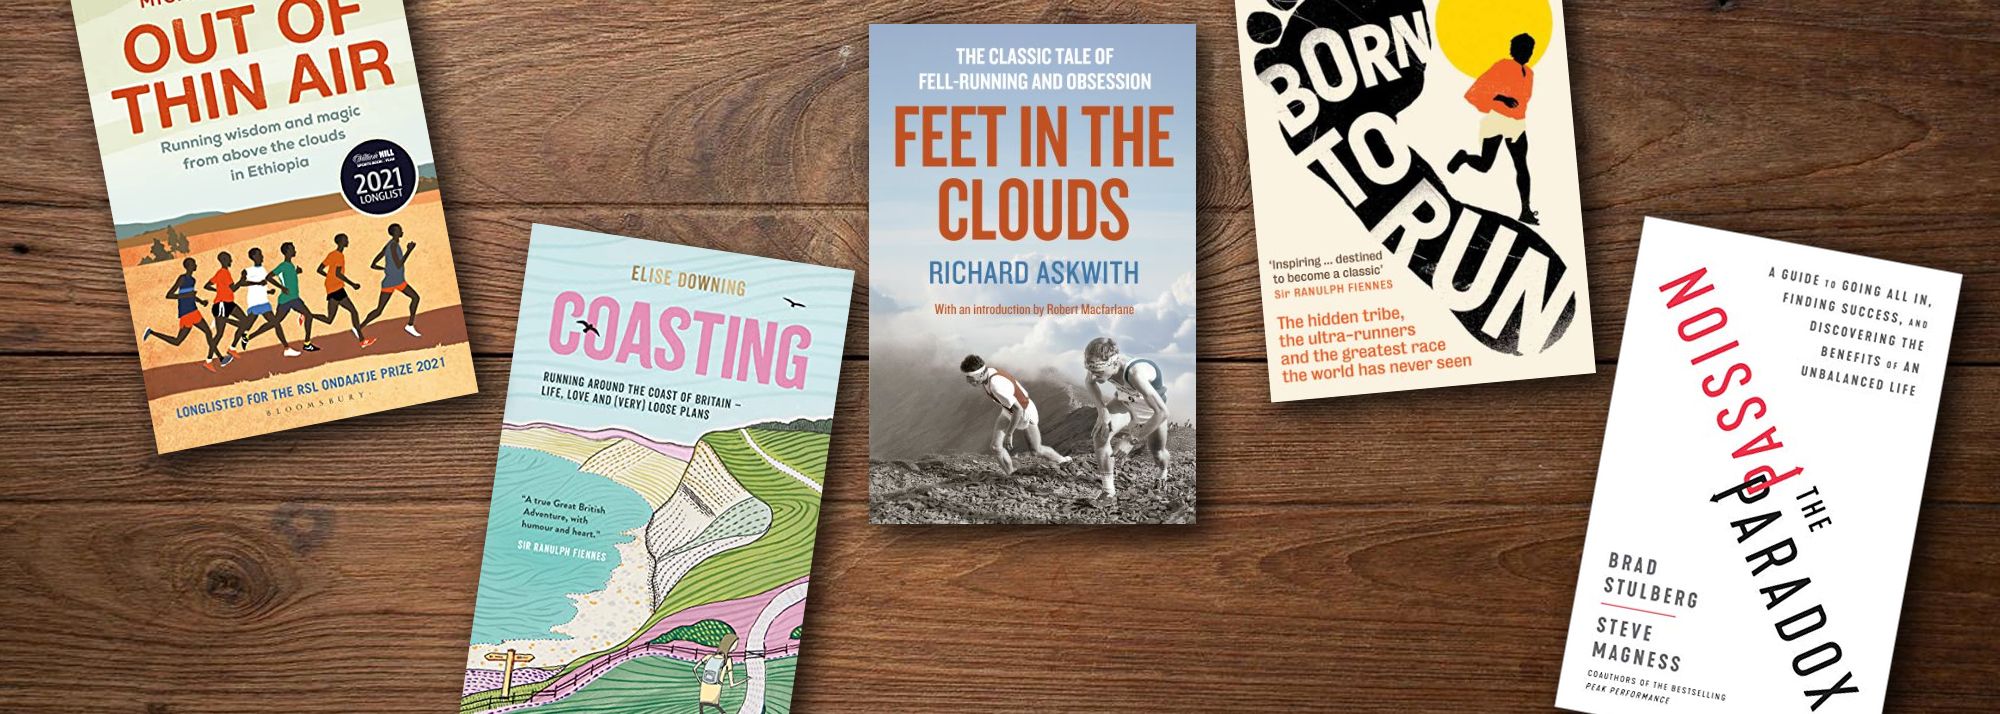 Here are five reads that will inspire you to get the trainers on once more.